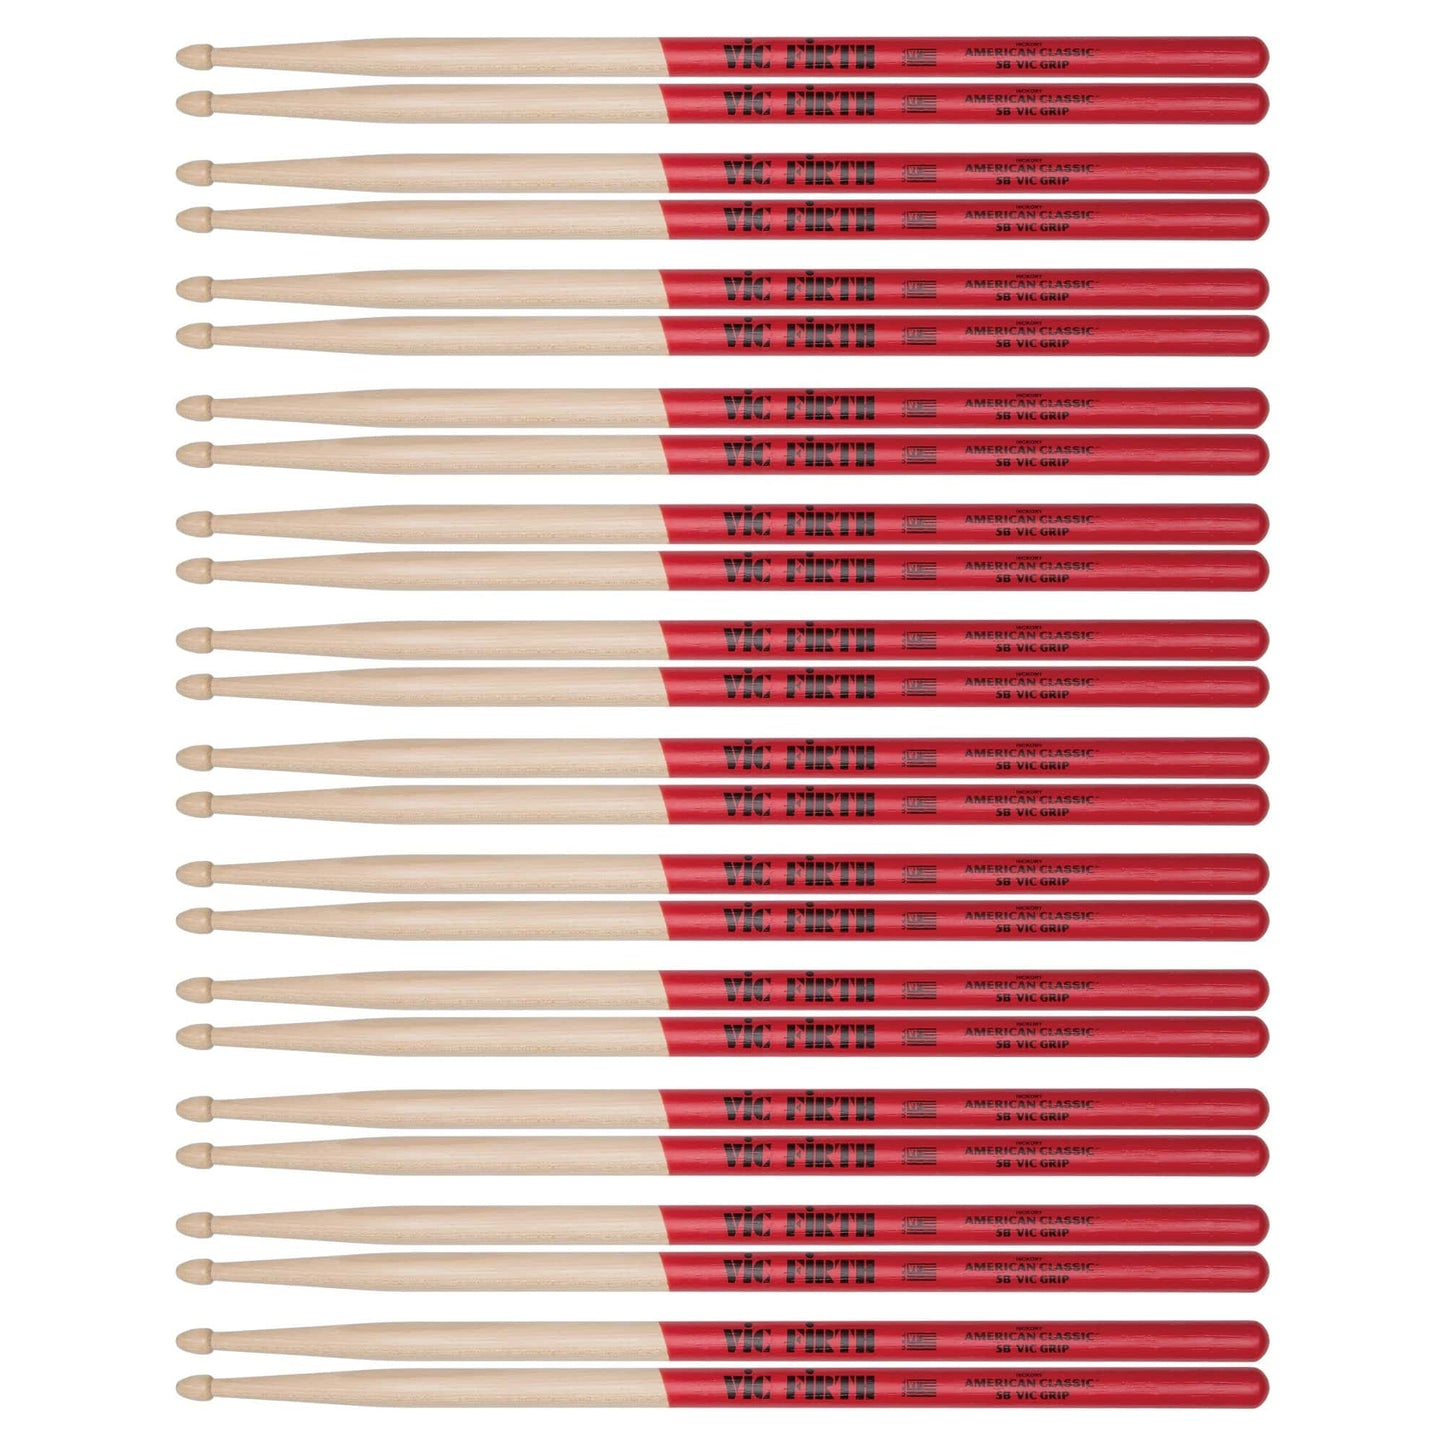 Vic Firth American Classic 5B Vic Grip Wood Tip Drum Sticks (12 Pair Bundle) Drums and Percussion / Parts and Accessories / Drum Sticks and Mallets